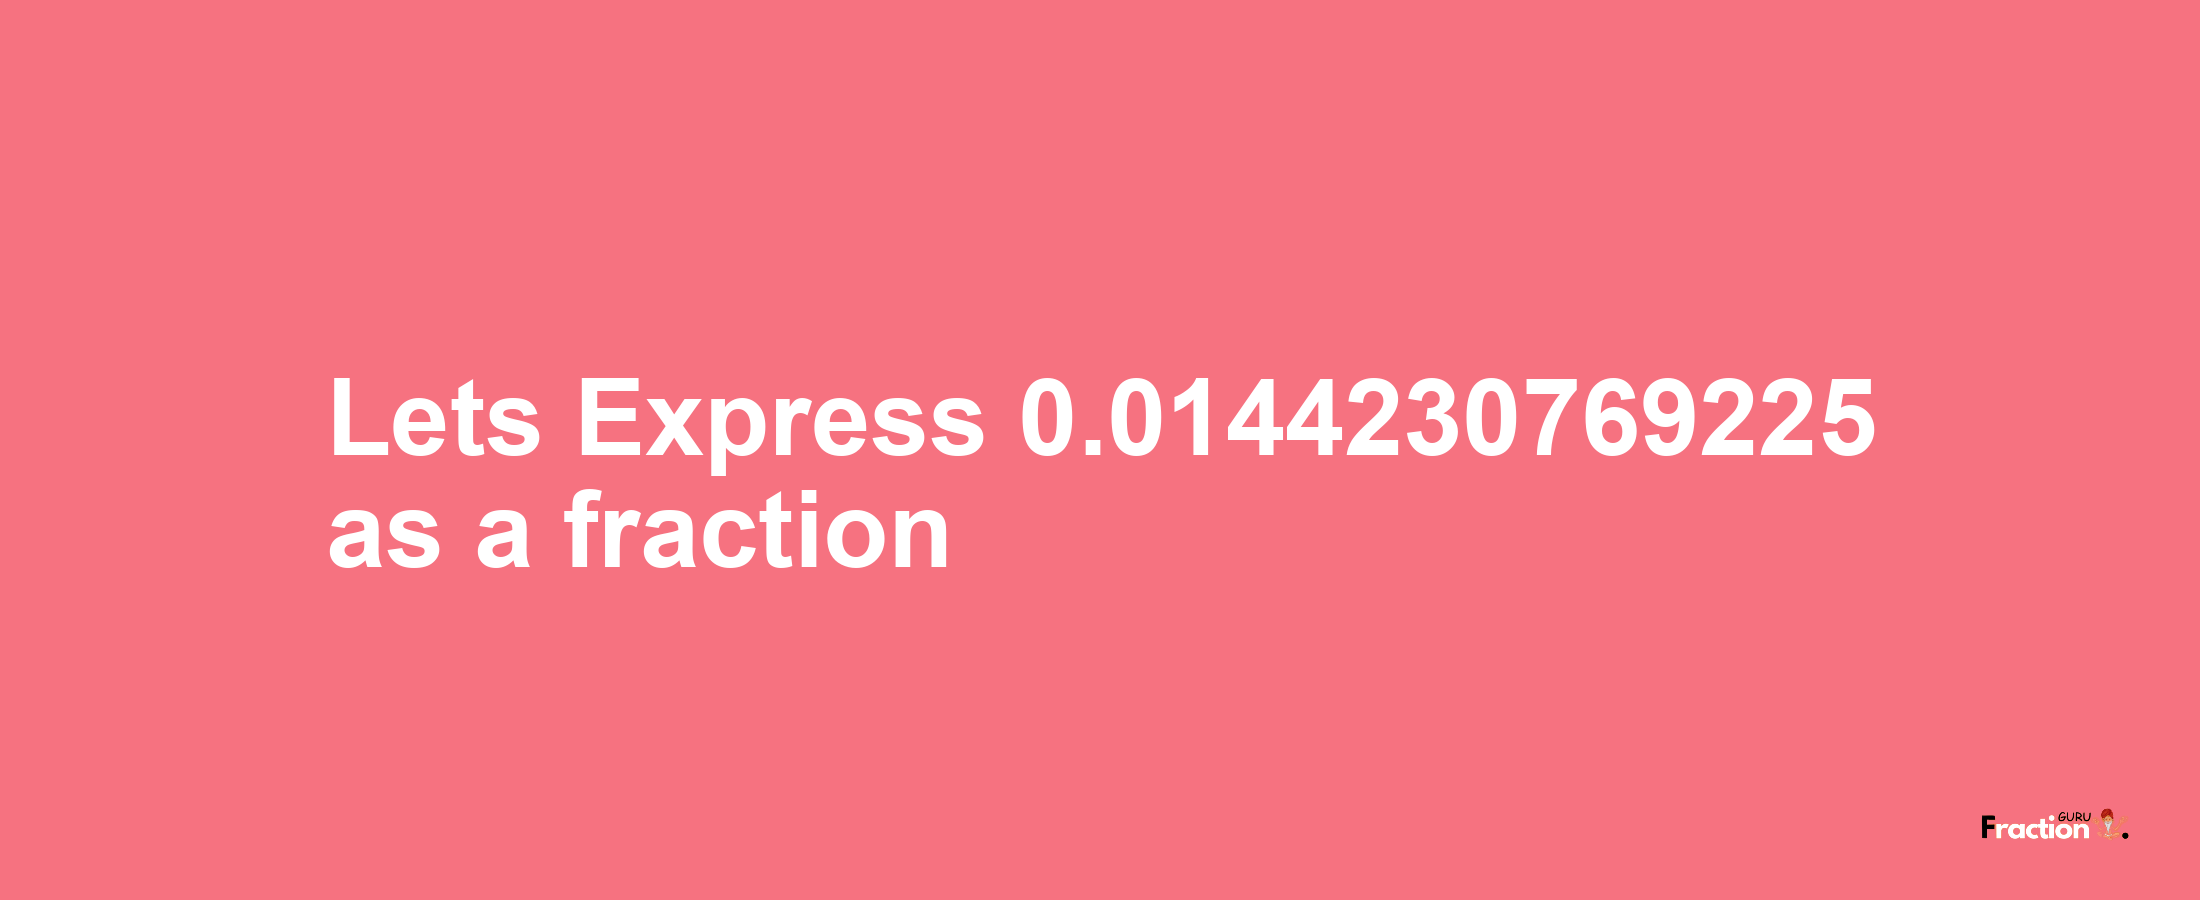 Lets Express 0.0144230769225 as afraction